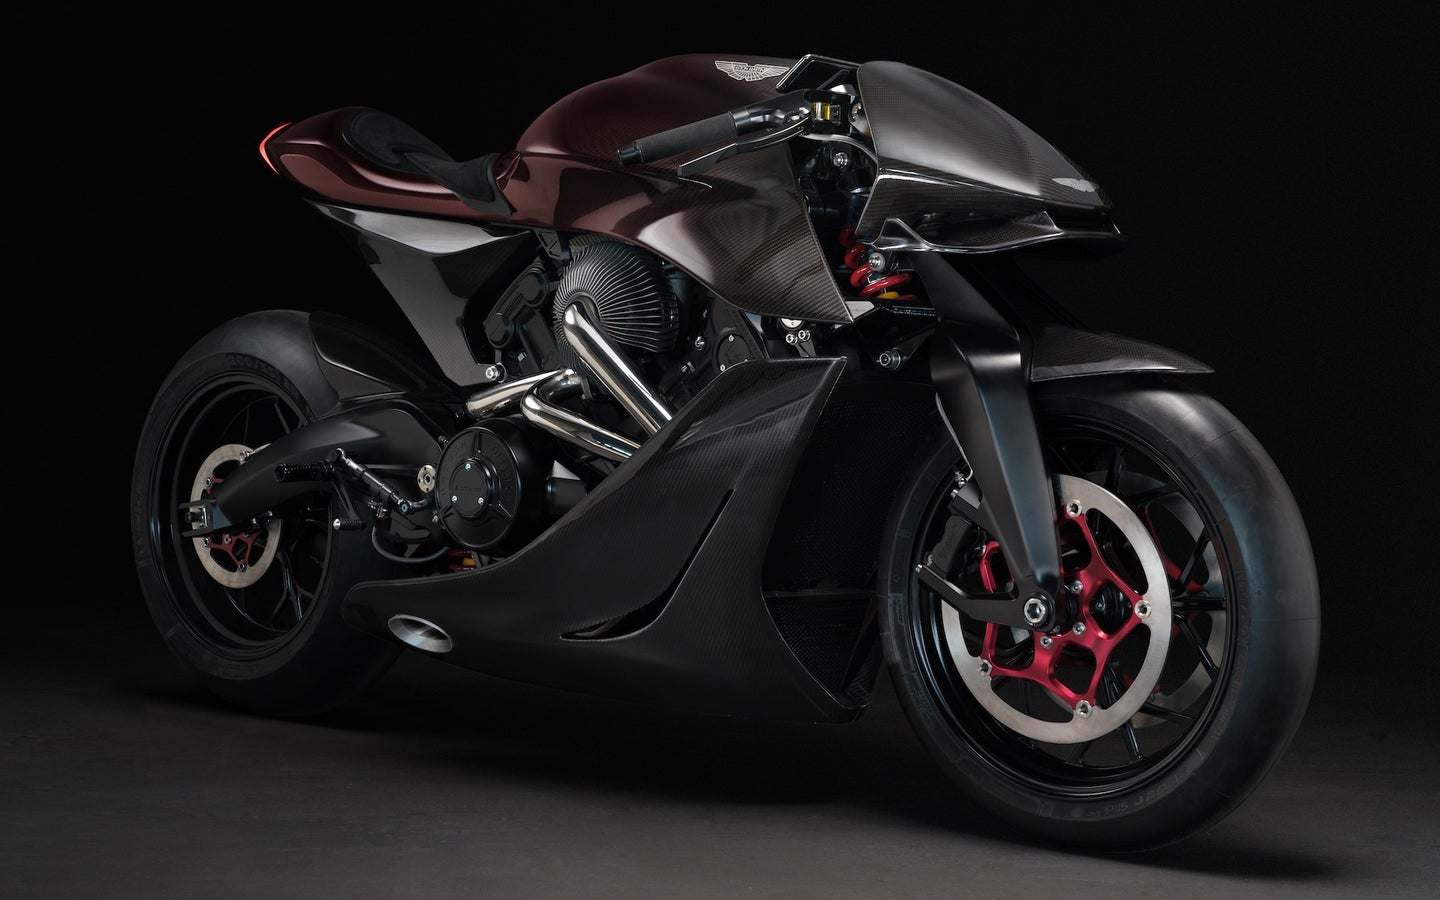 Aston Martin’s New 180-HP, Carbon Fiber Motorcycle Hits the Track